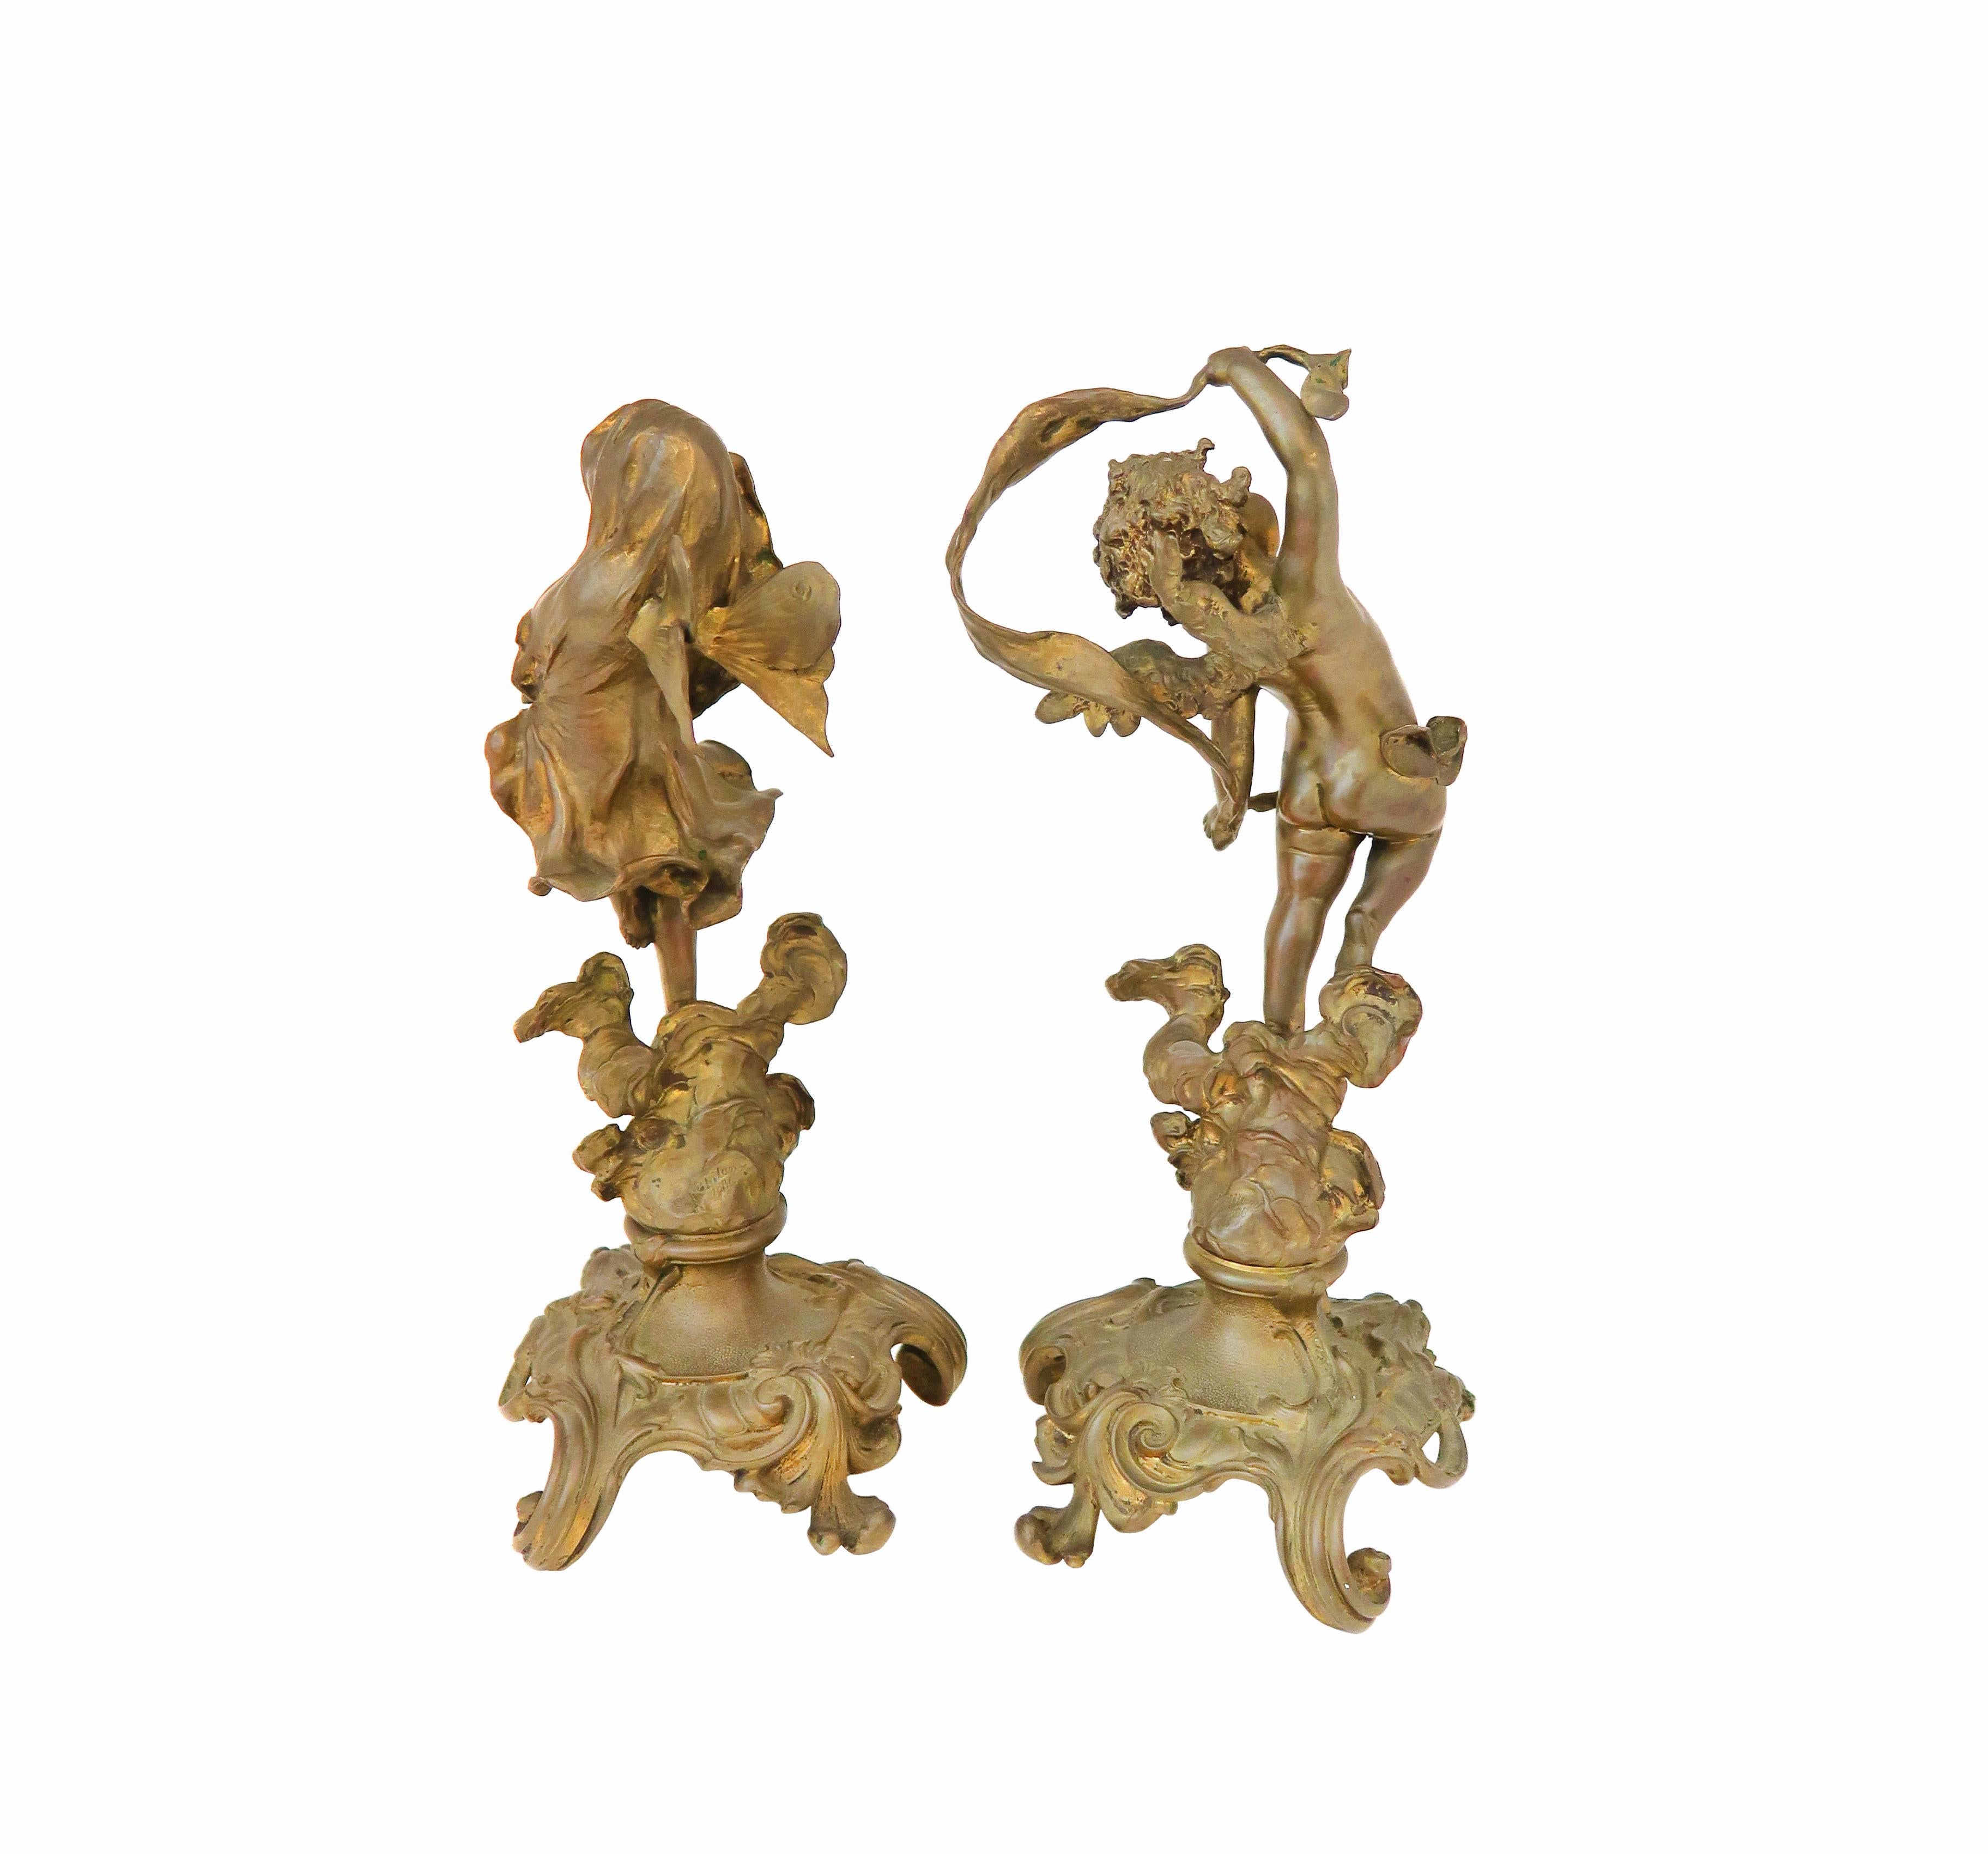 Cast Pair of 19th Century German Bronze Cupids by Franz Iffland